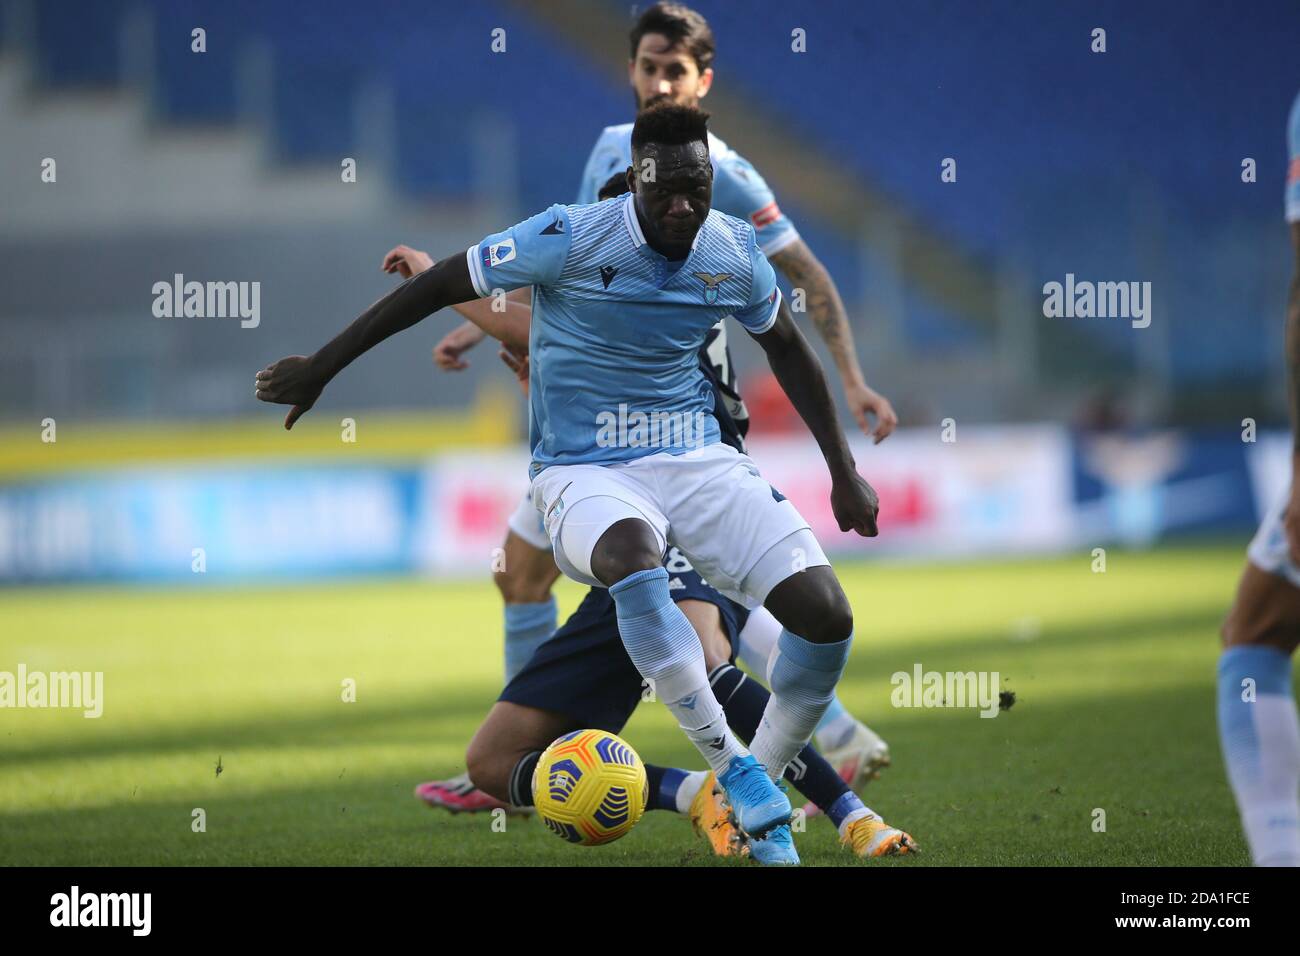 Rome, Italy. 08th Nov, 2020. Rome, Italy - 08/11/2020: Felipe Caicedo (LAZIO) in action during the Serie A italian league match SS LAZIO vs FC Juventus at Olympic Stadium in Rome. Credit: Independent Photo Agency/Alamy Live News Stock Photo